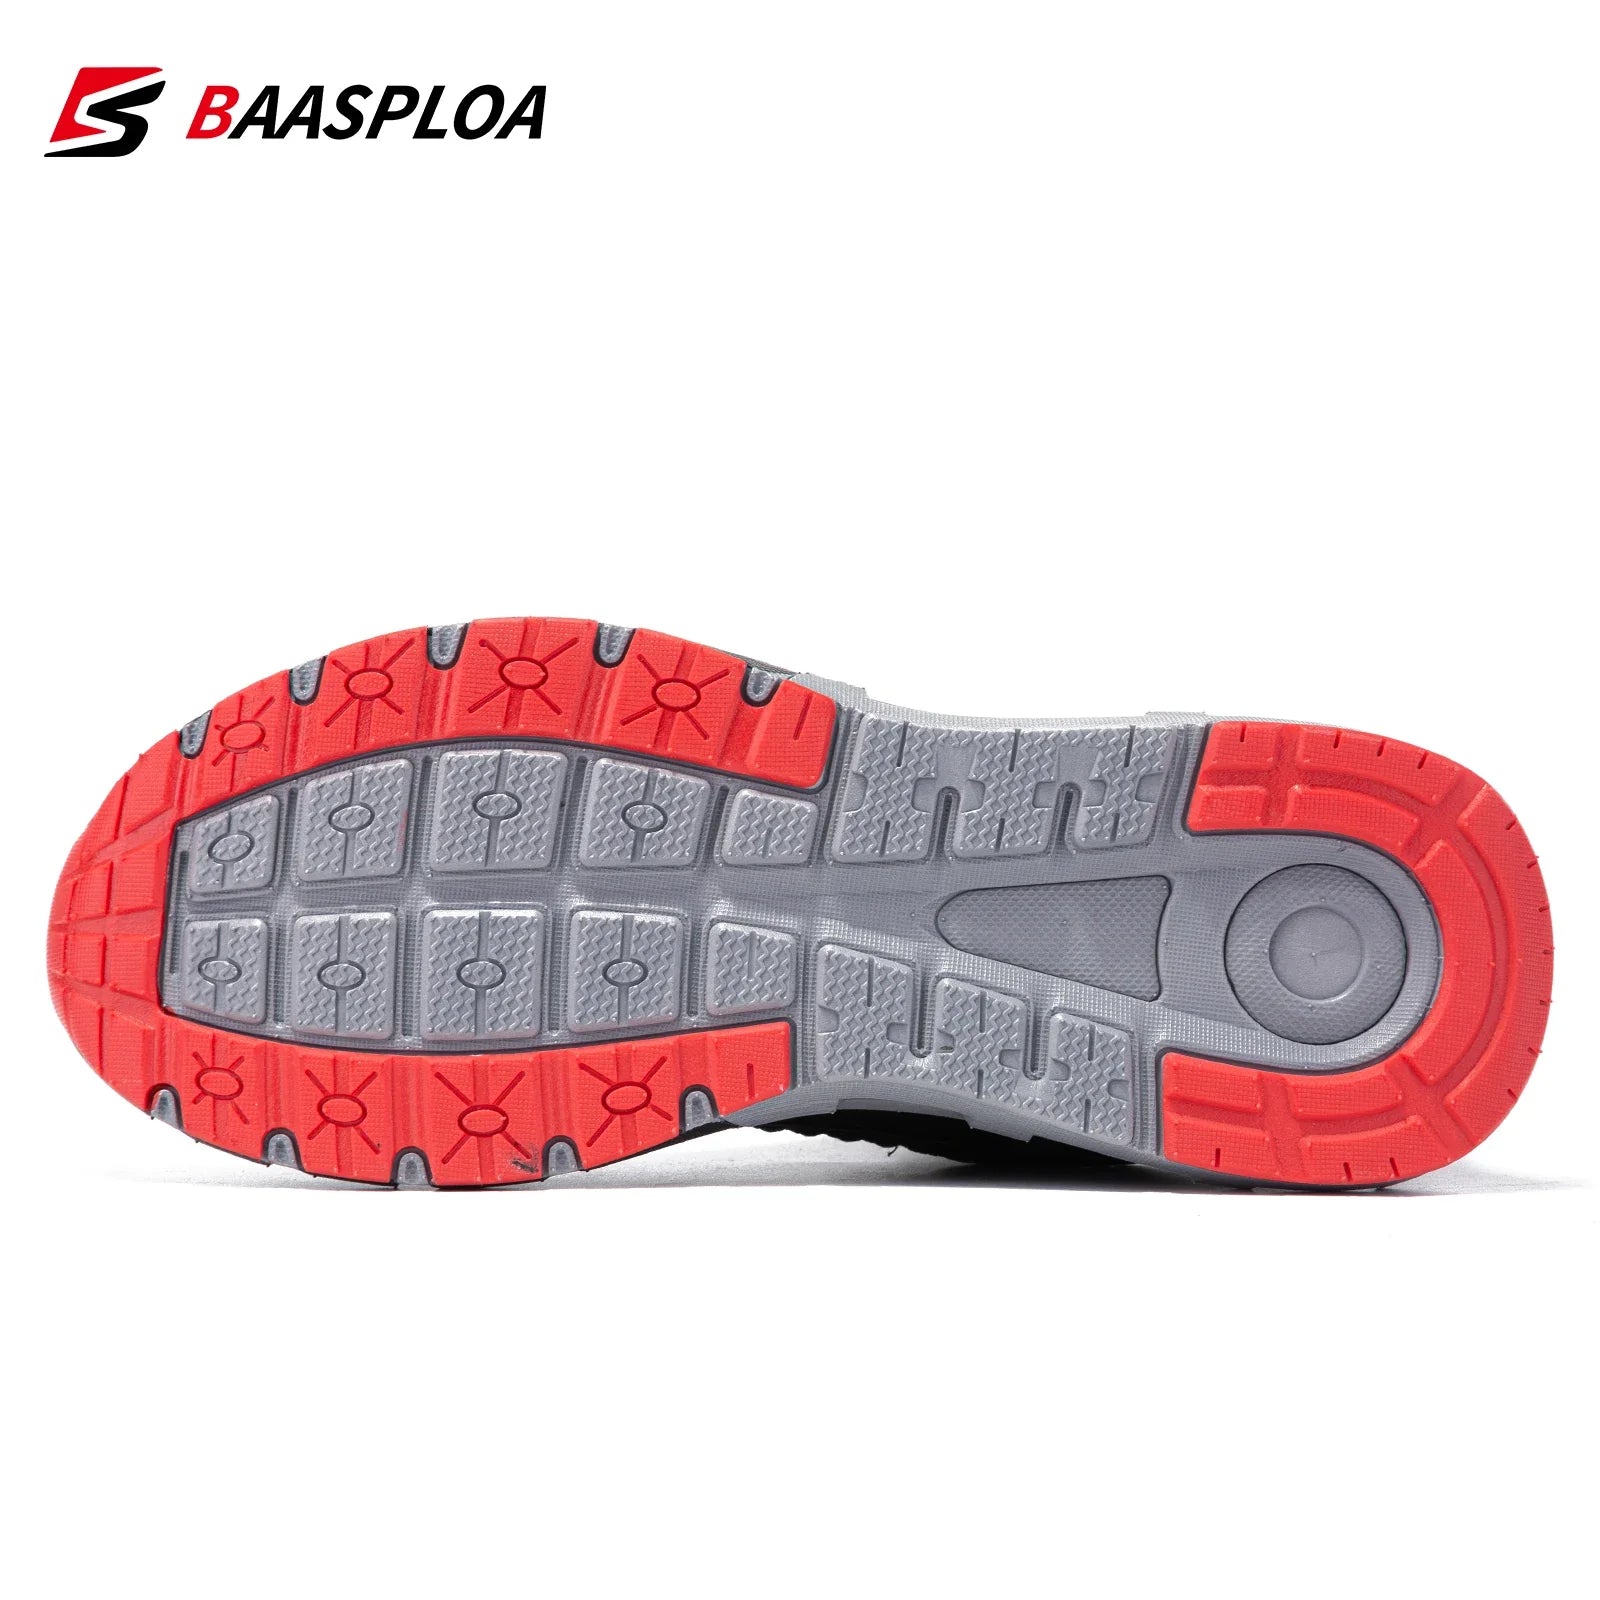 Baasploa New Men's Sneakers Lightweight Breathable - enoughdream.com